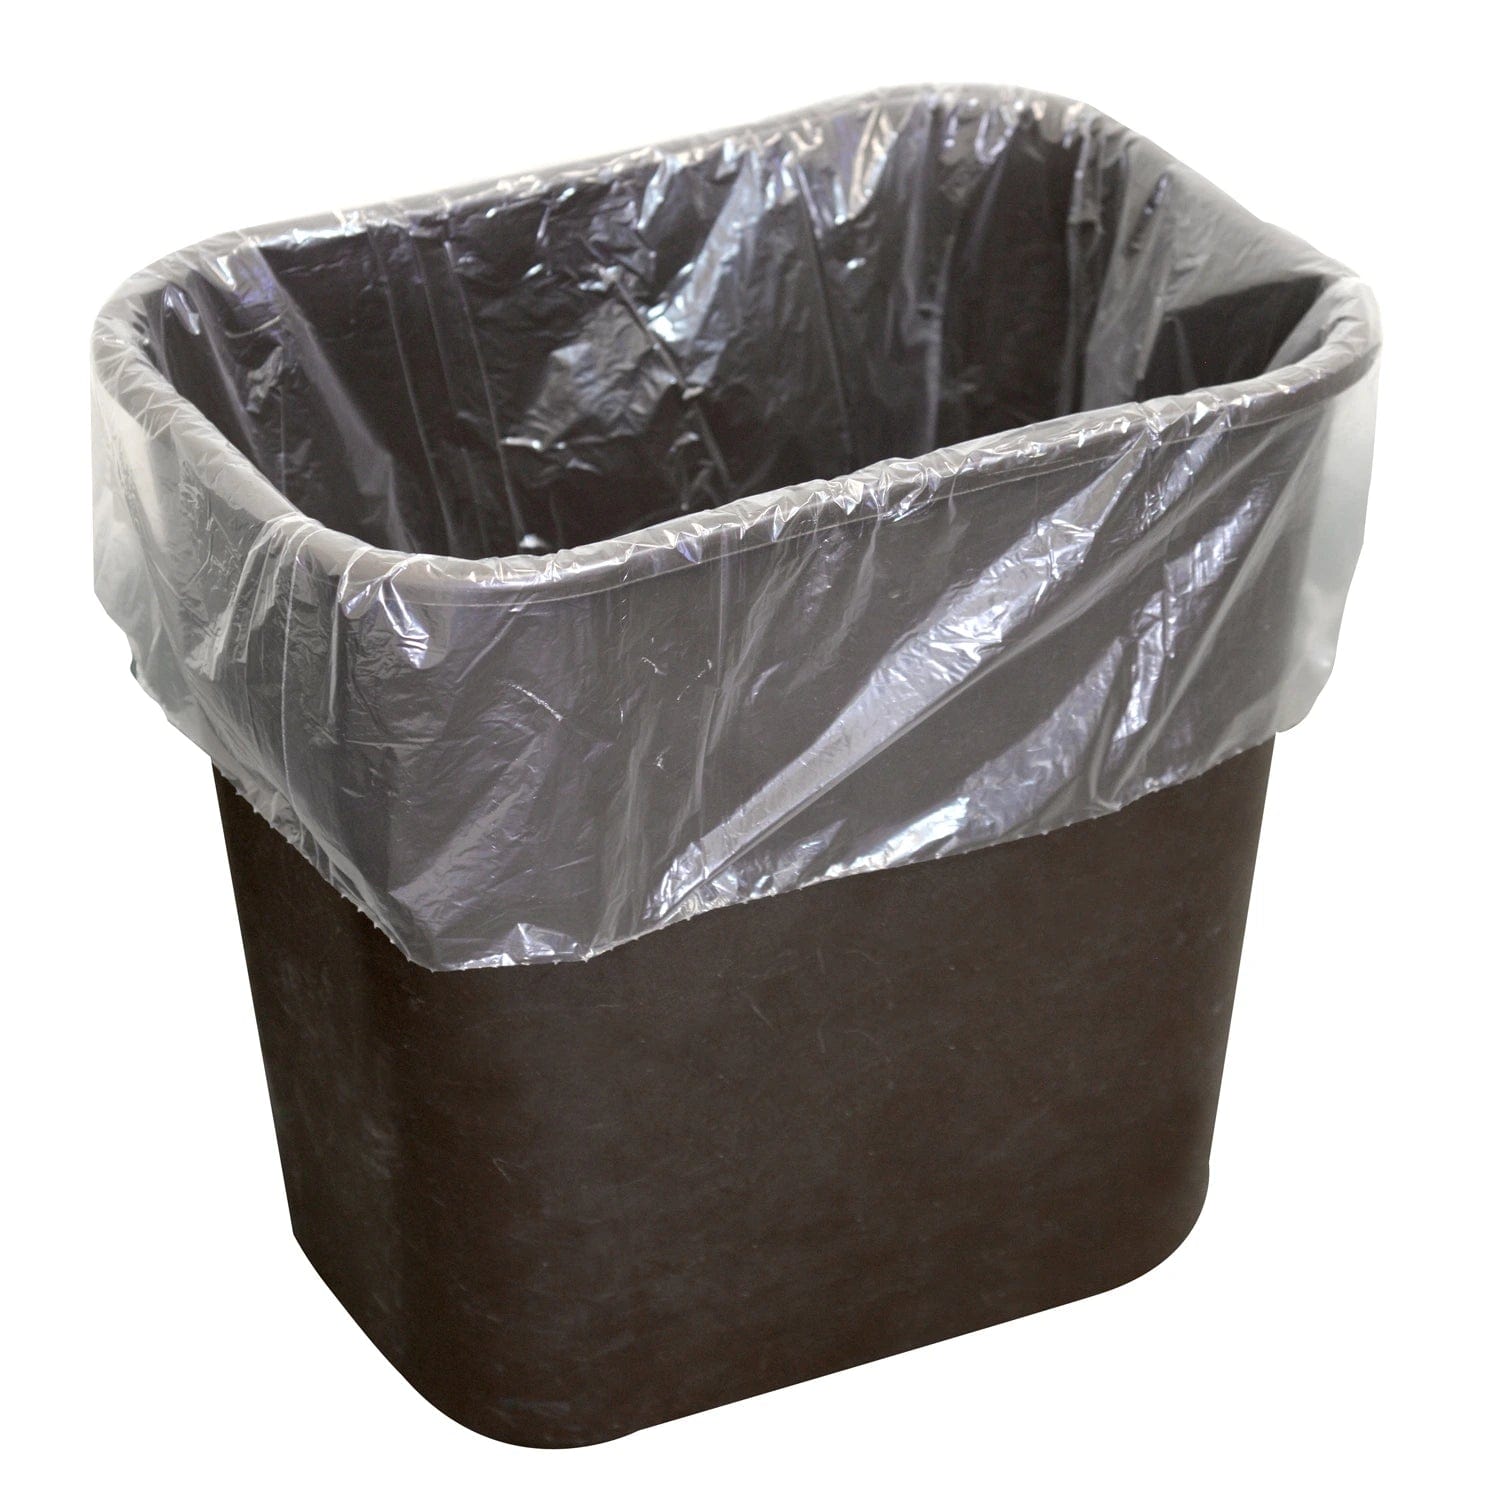 Unitex® Trash Liners, Curb Side Receptacle, Low Density Liners, 65, 95  Gallon, 35 x 28 x 70, 2.0 Mil, Clear (50 PK)